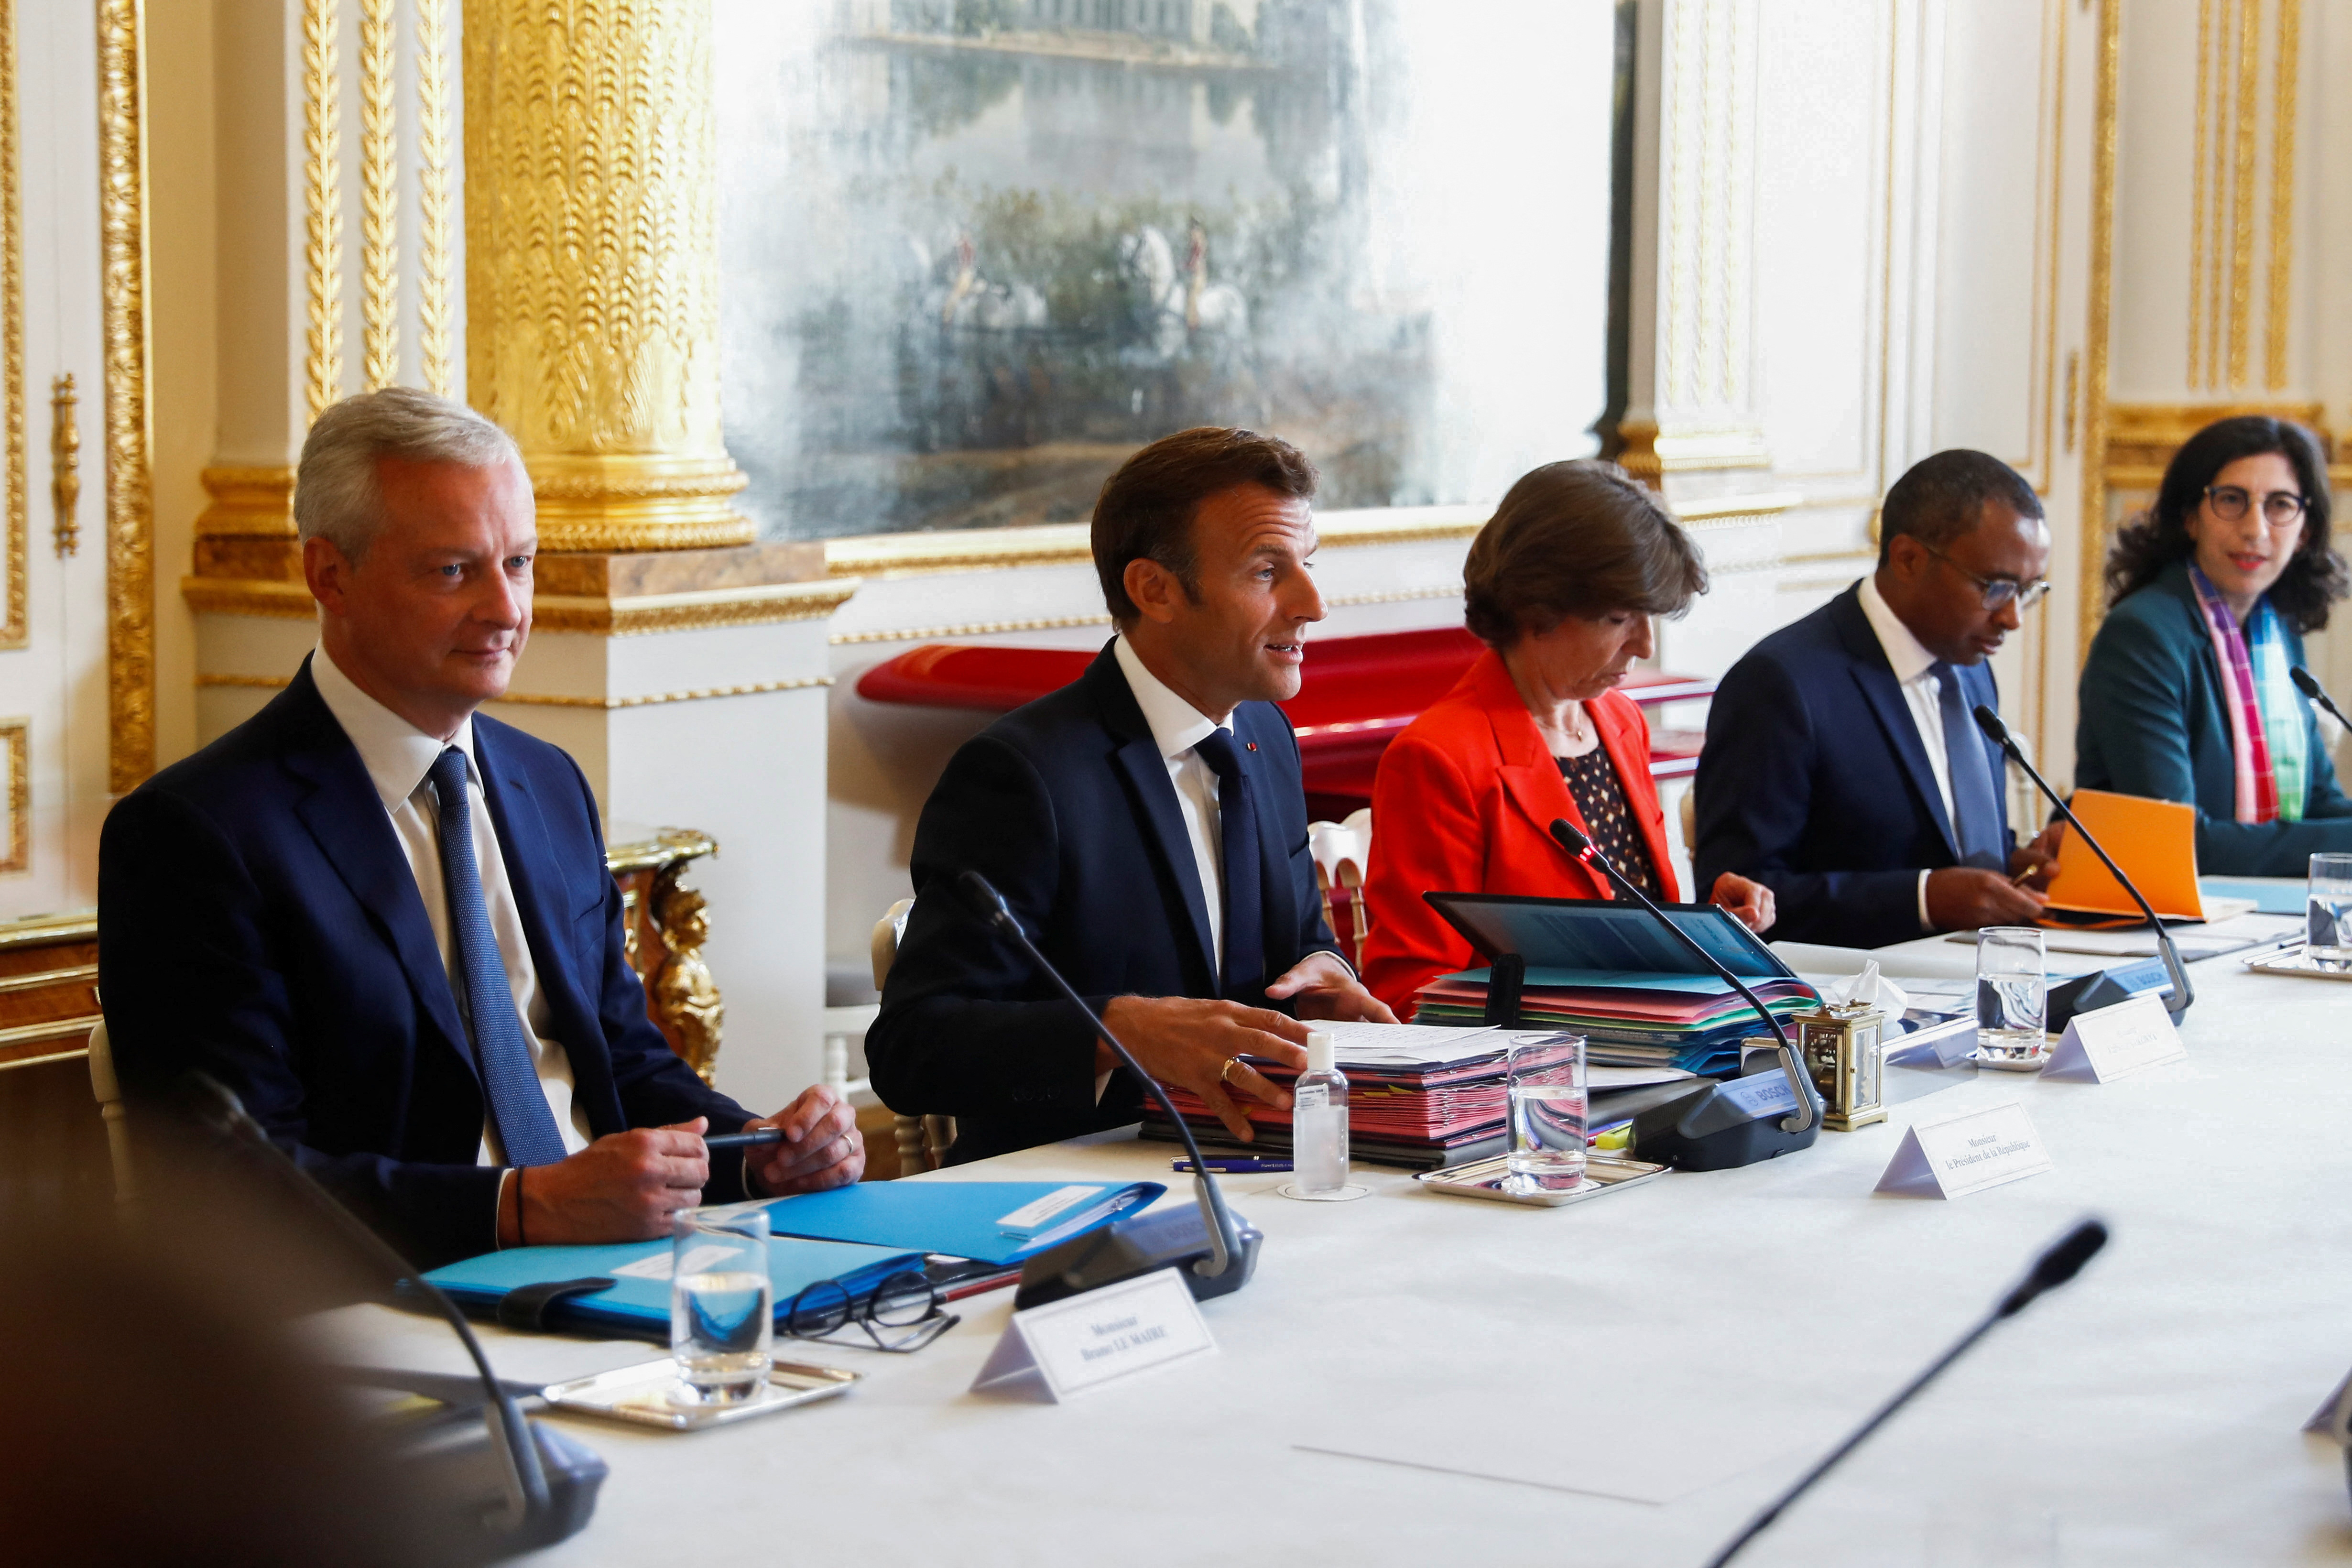 First French cabinet meeting after summer break